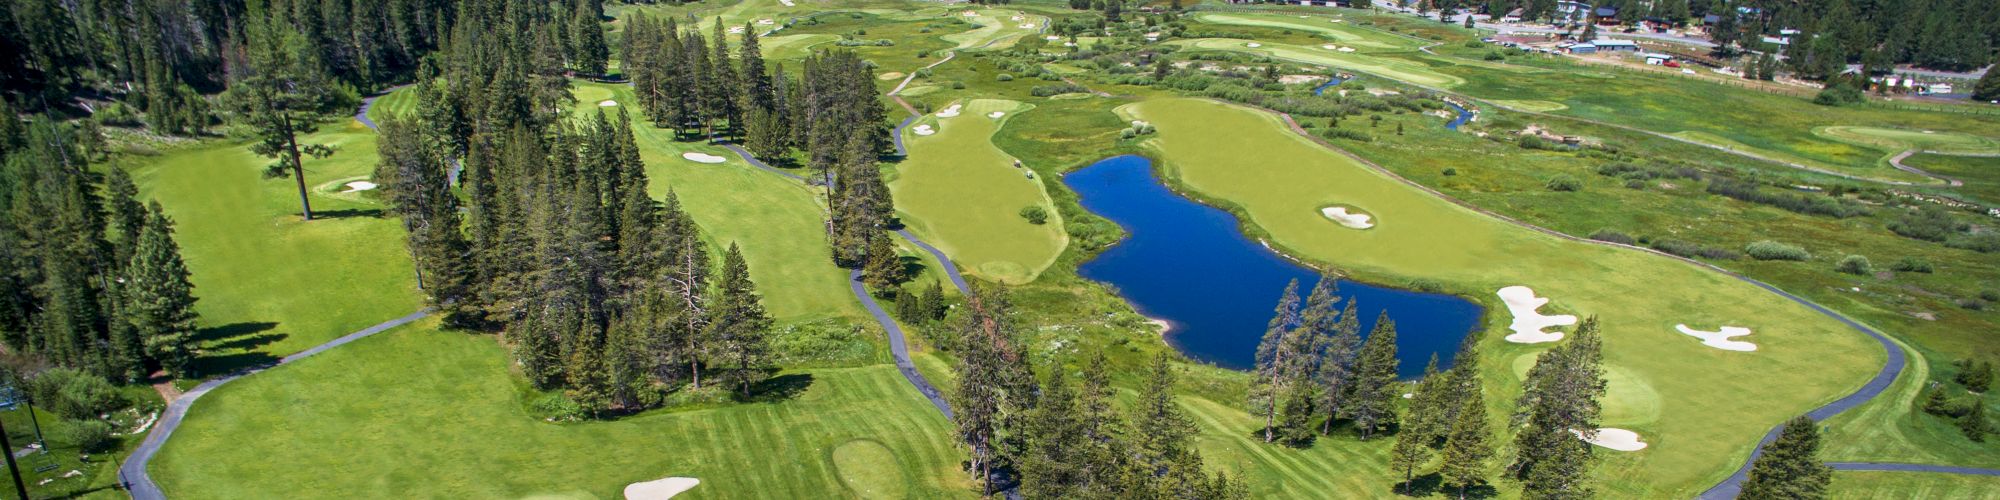 This image shows an aerial view of a golf course surrounded by trees and mountains, with a pond in the center and several sand bunkers.